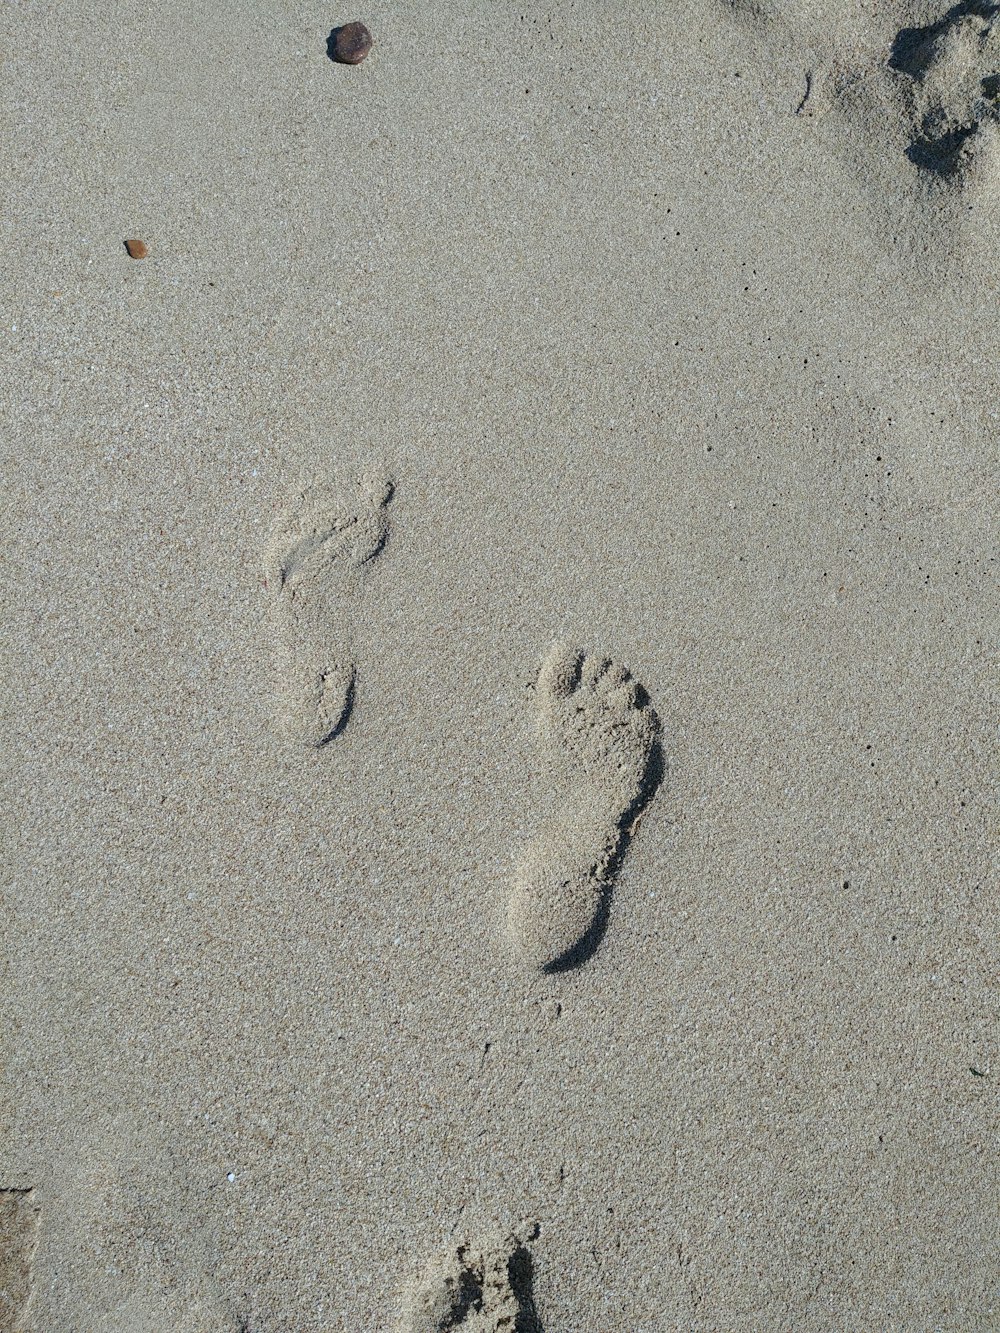 a pair of footprints in the sand on a beach